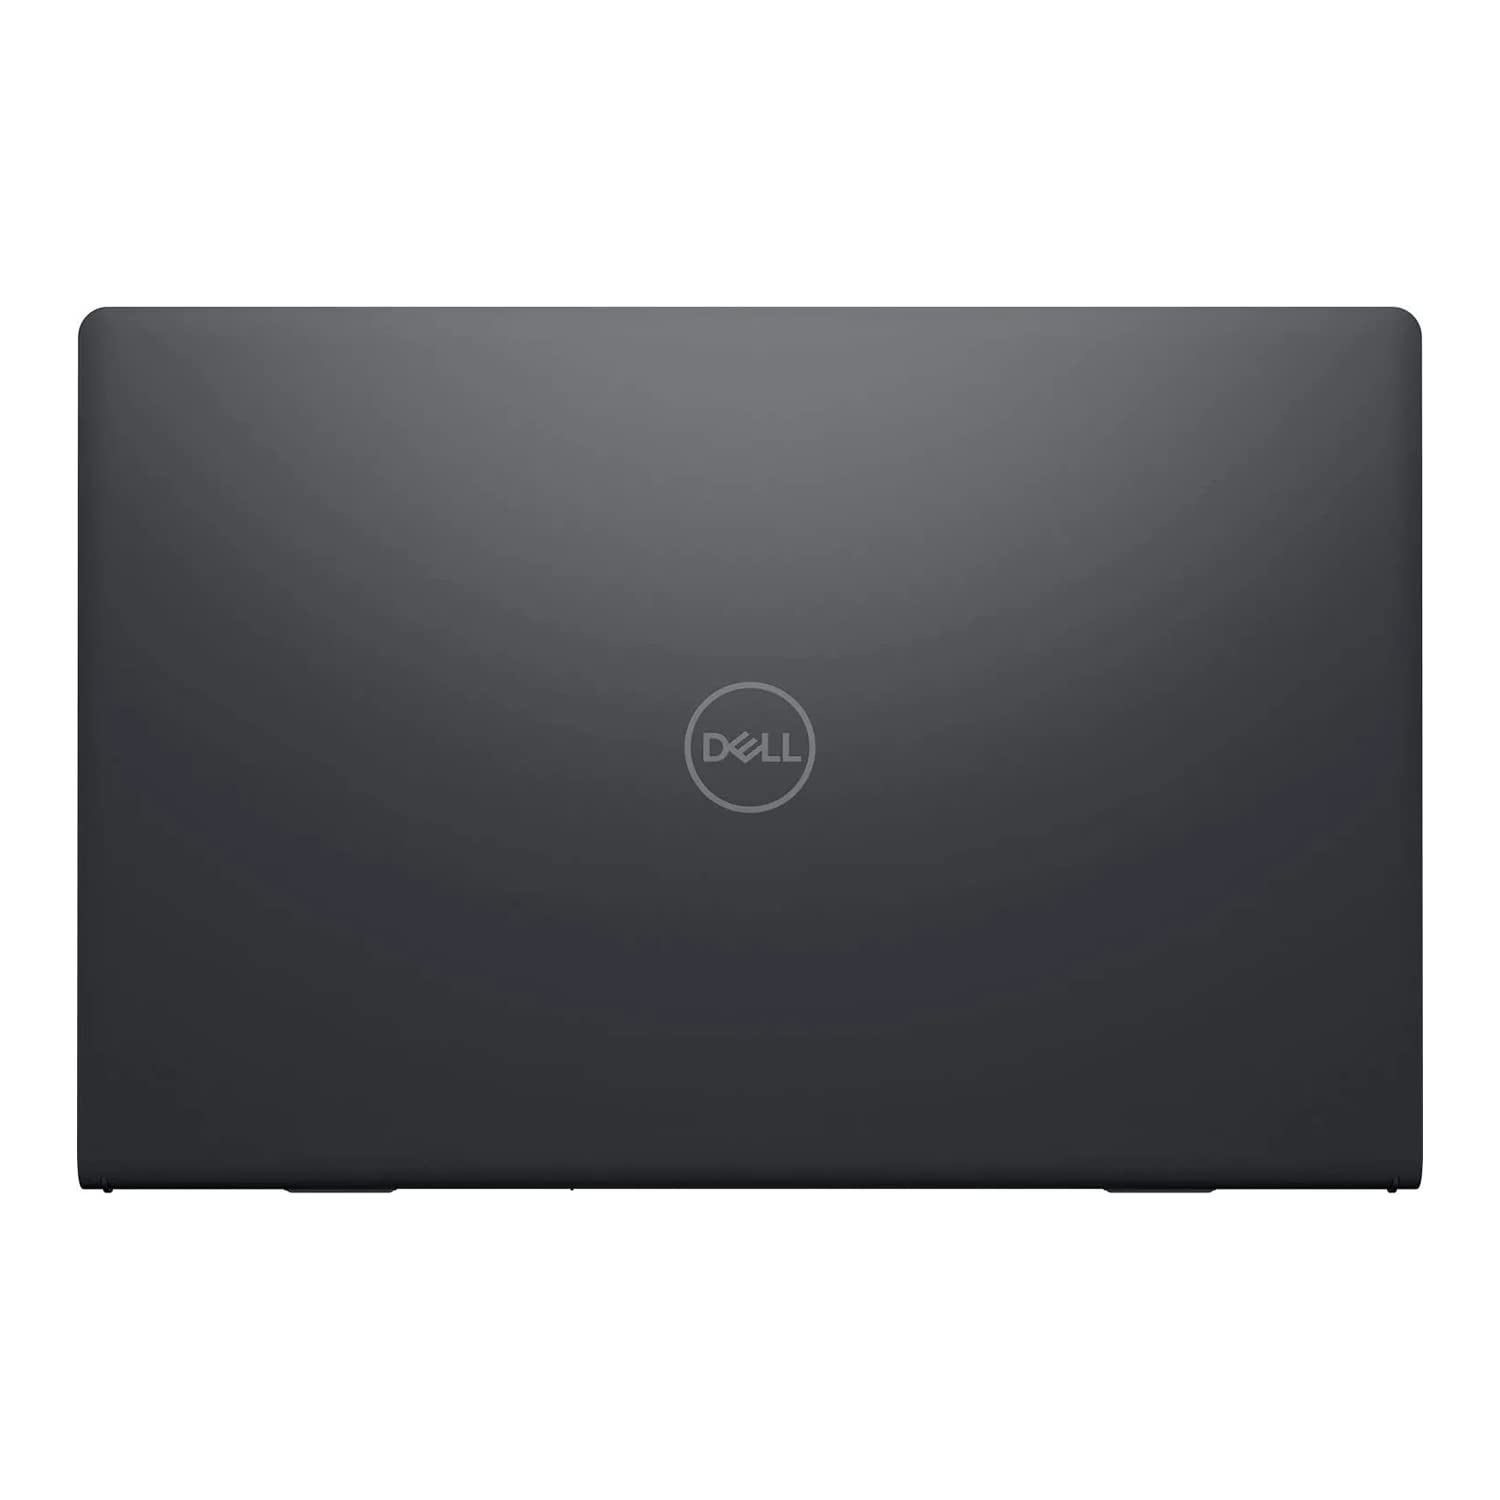 Dell Inspiron 3000 Series 3511 Laptop, 15.6